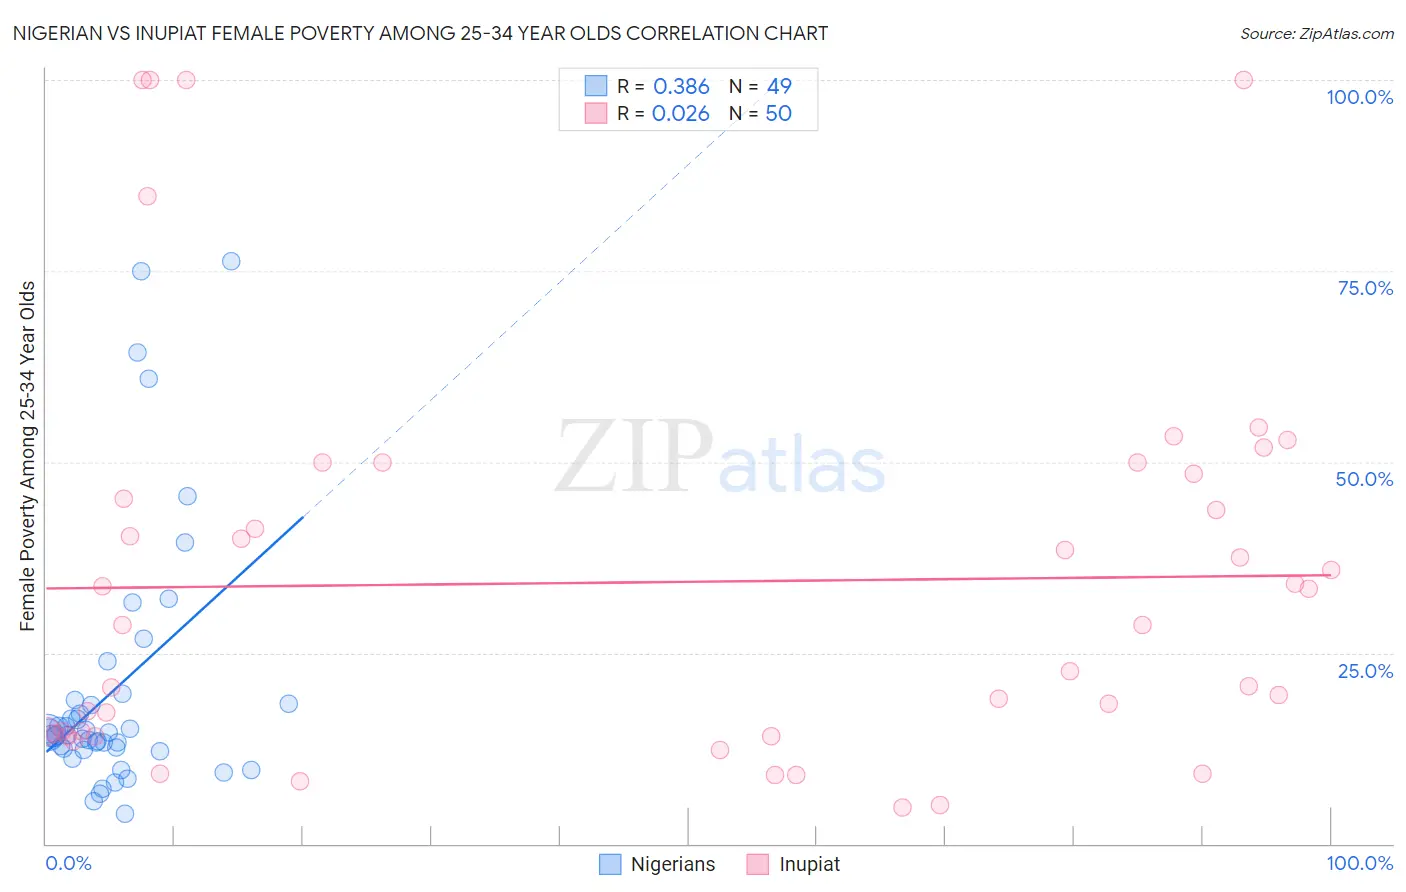 Nigerian vs Inupiat Female Poverty Among 25-34 Year Olds